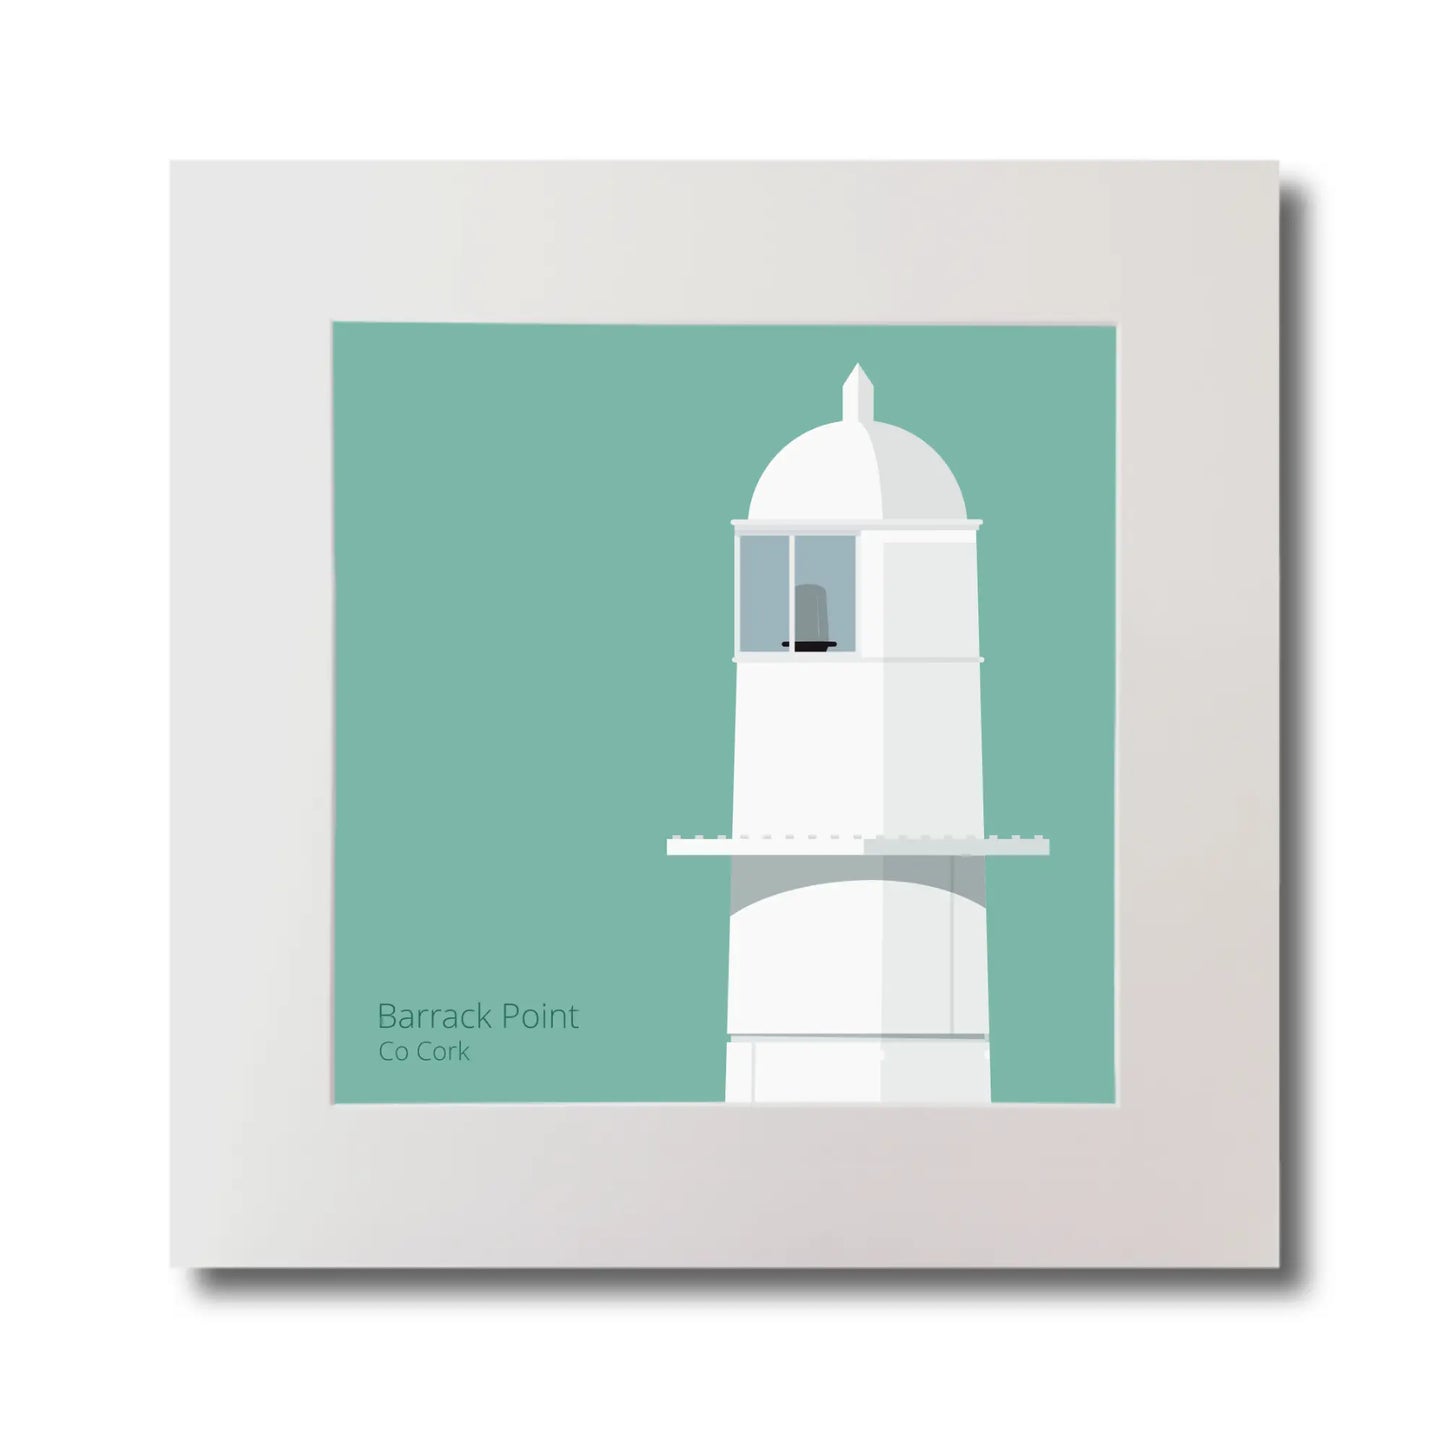 Illustration of Barrack Point lighthouse on an ocean green background, mounted and measuring 30x30cm.